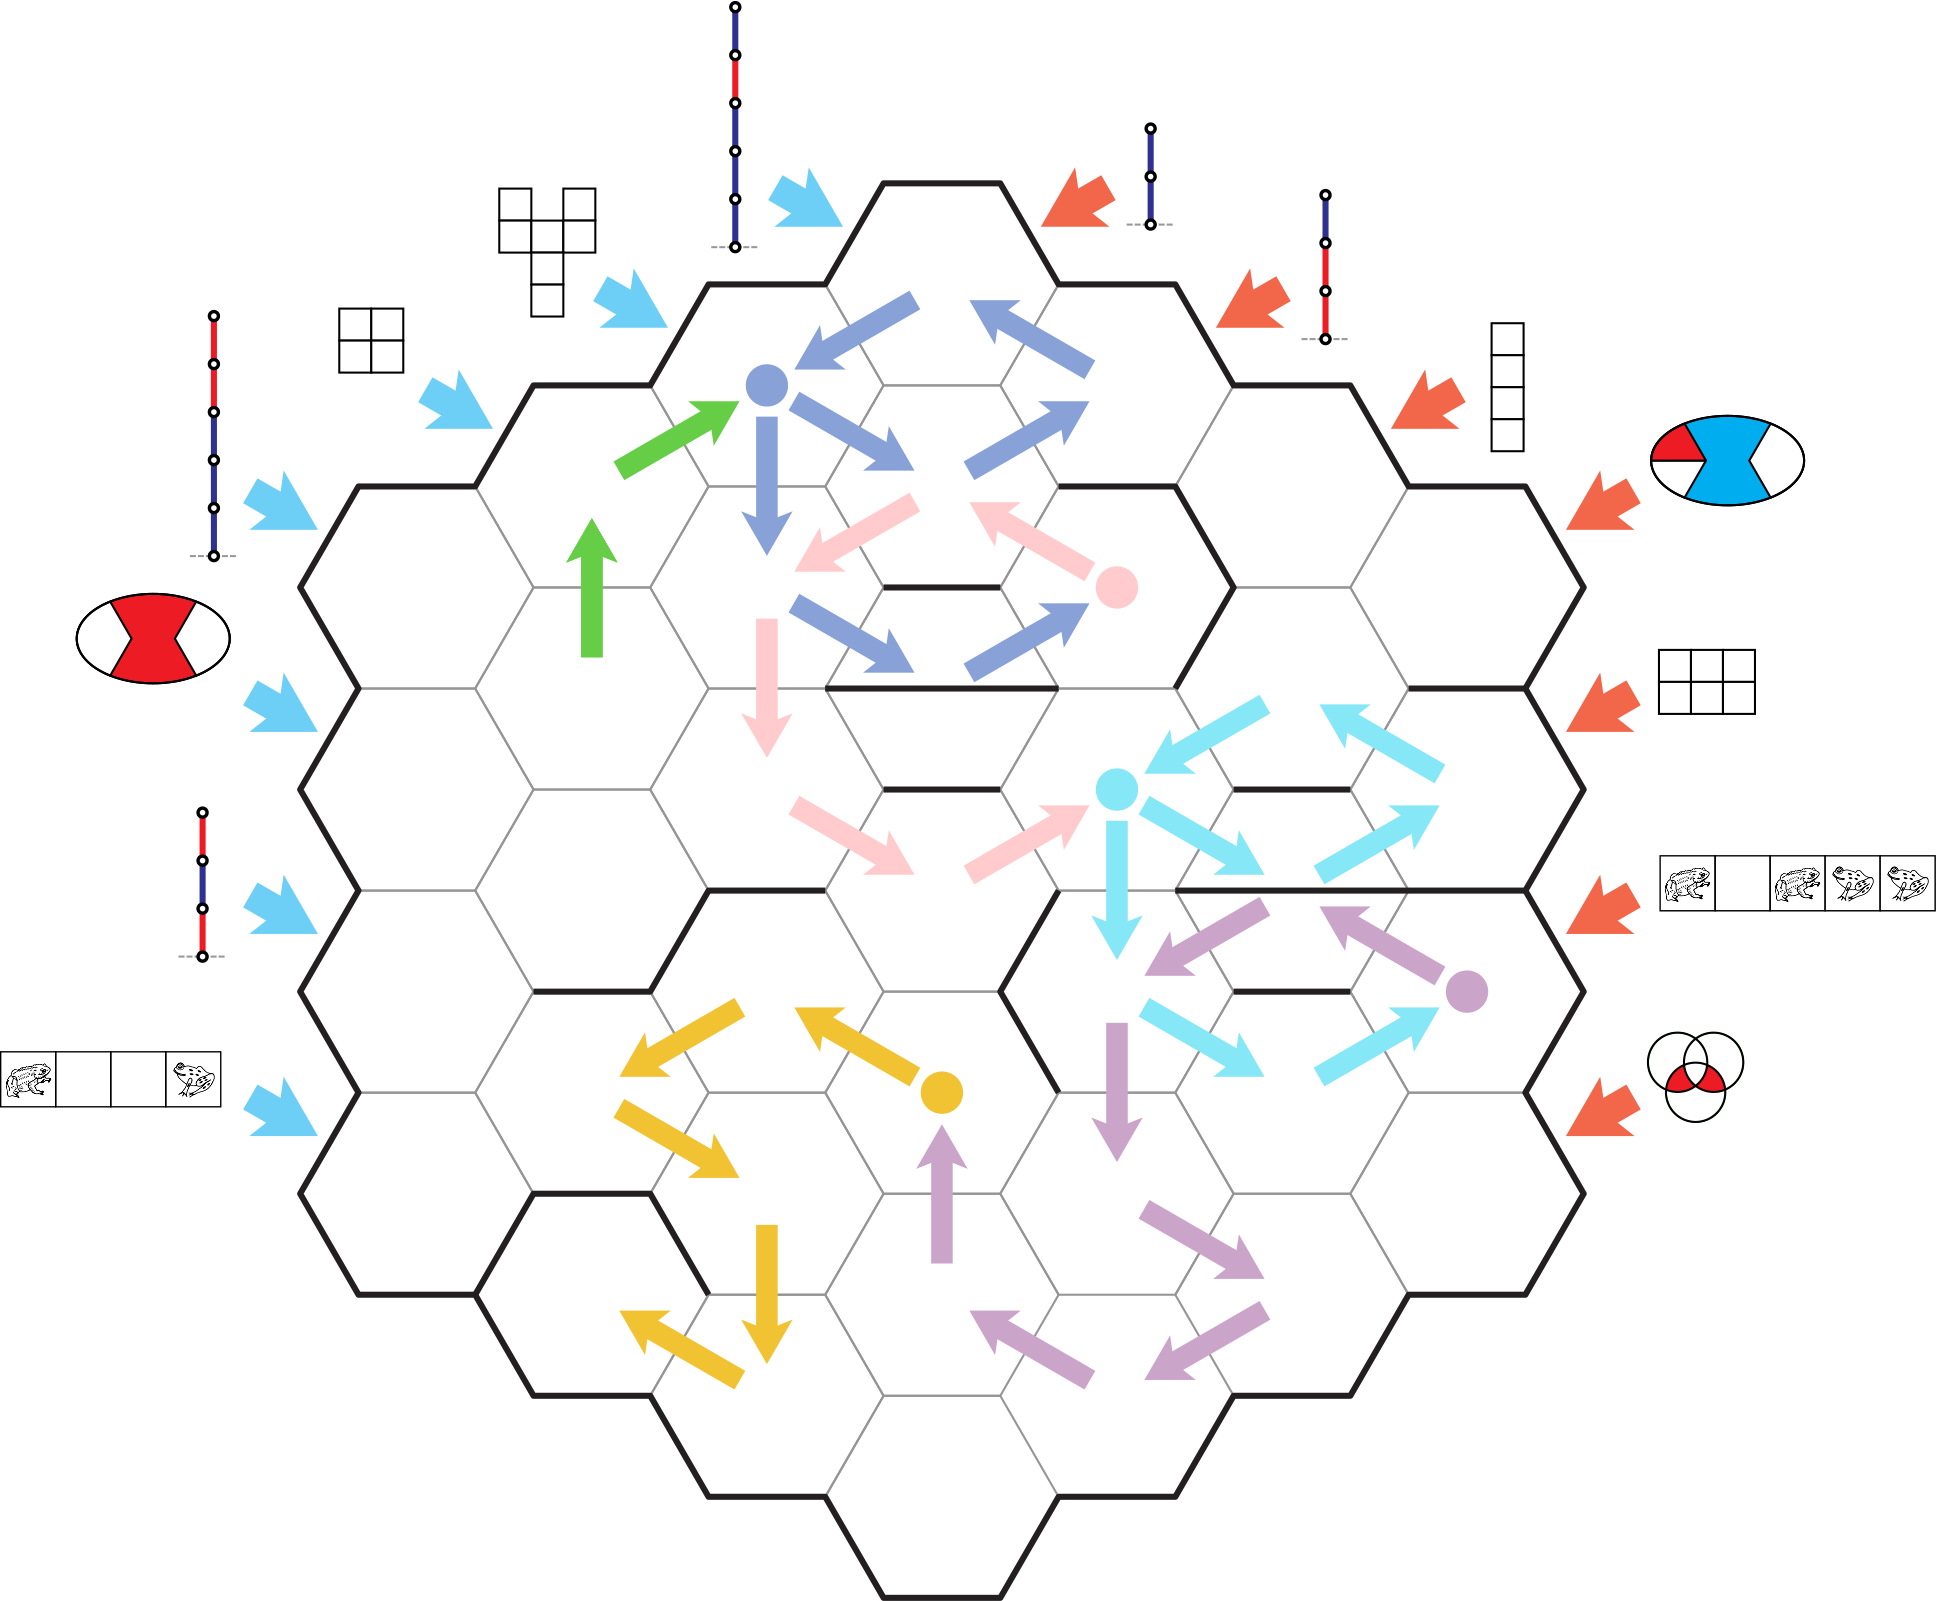 a hexagonal maze, with various games corresponding to each row of the grid. The solution path is given